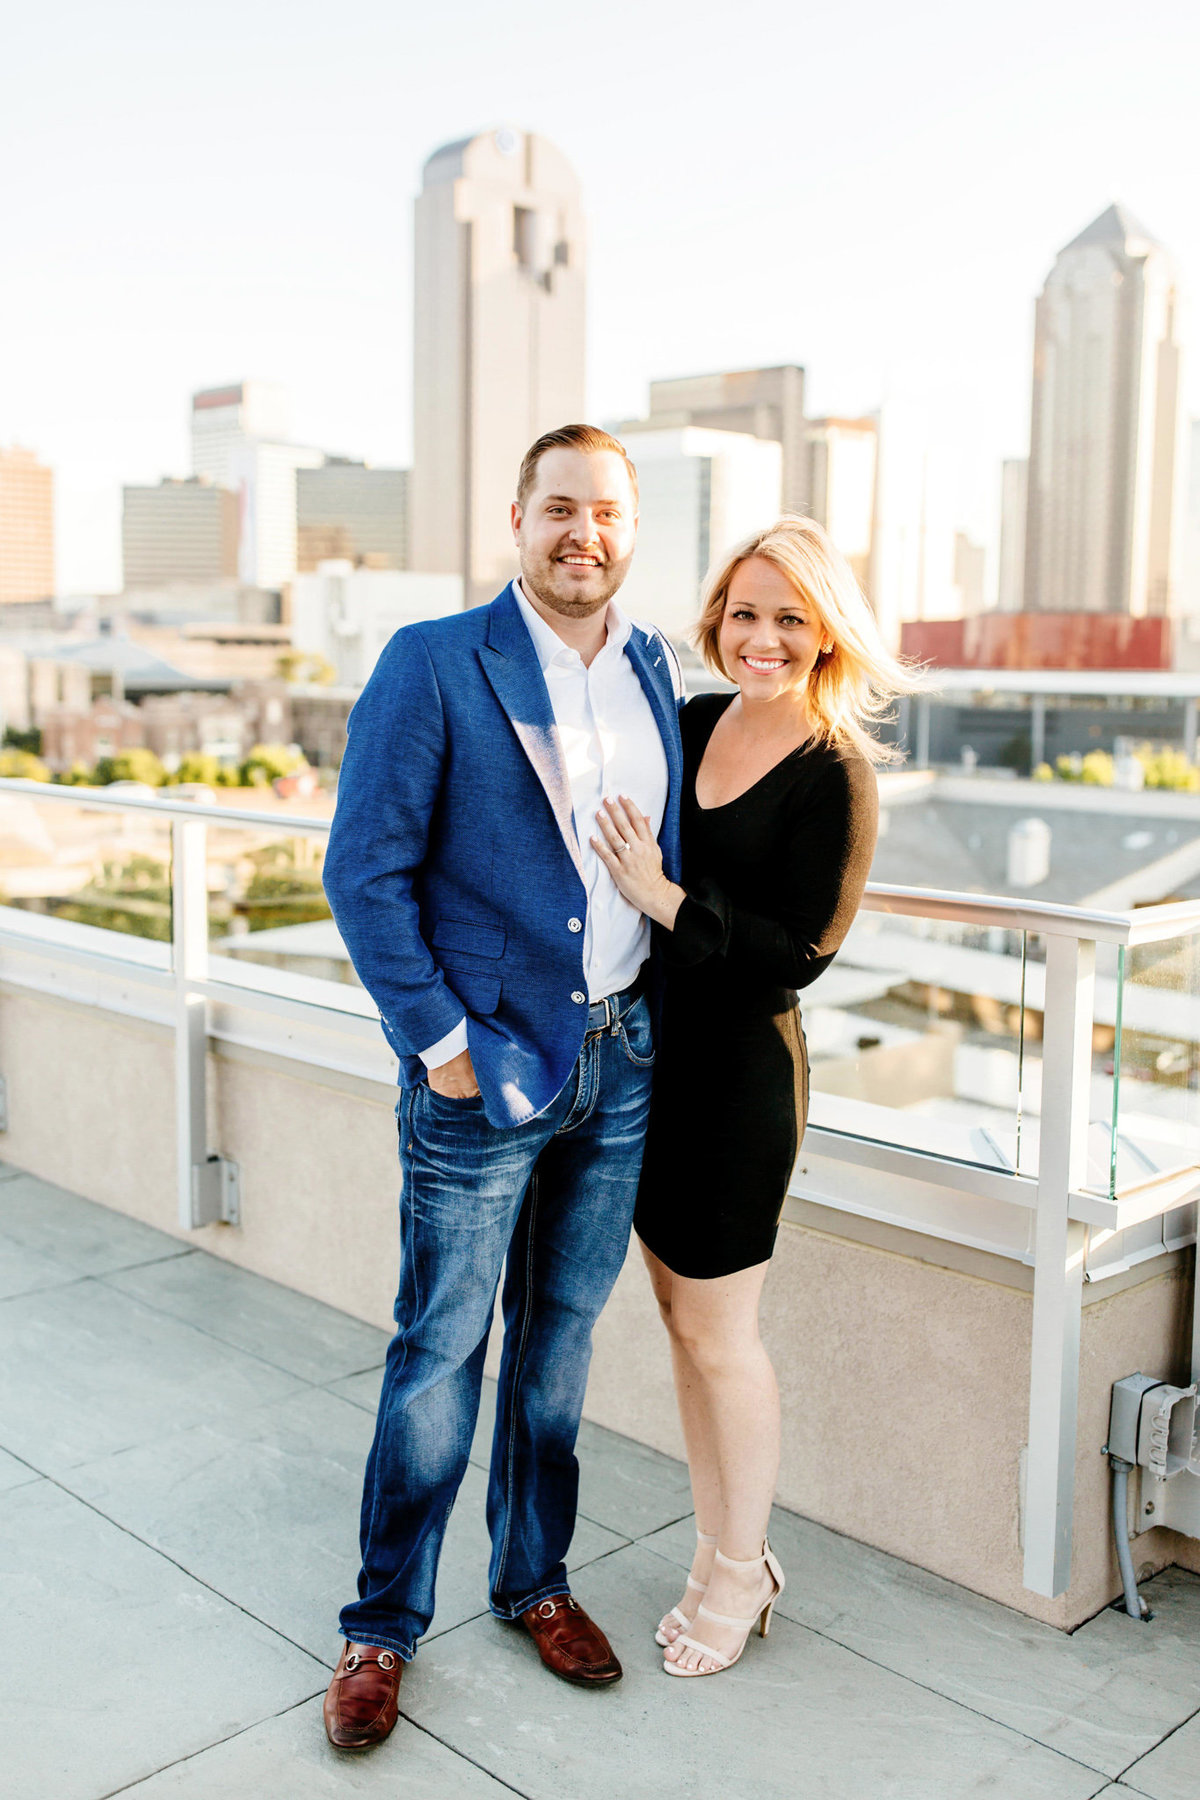 Eric & Megan - Downtown Dallas Rooftop Proposal & Engagement Session-59